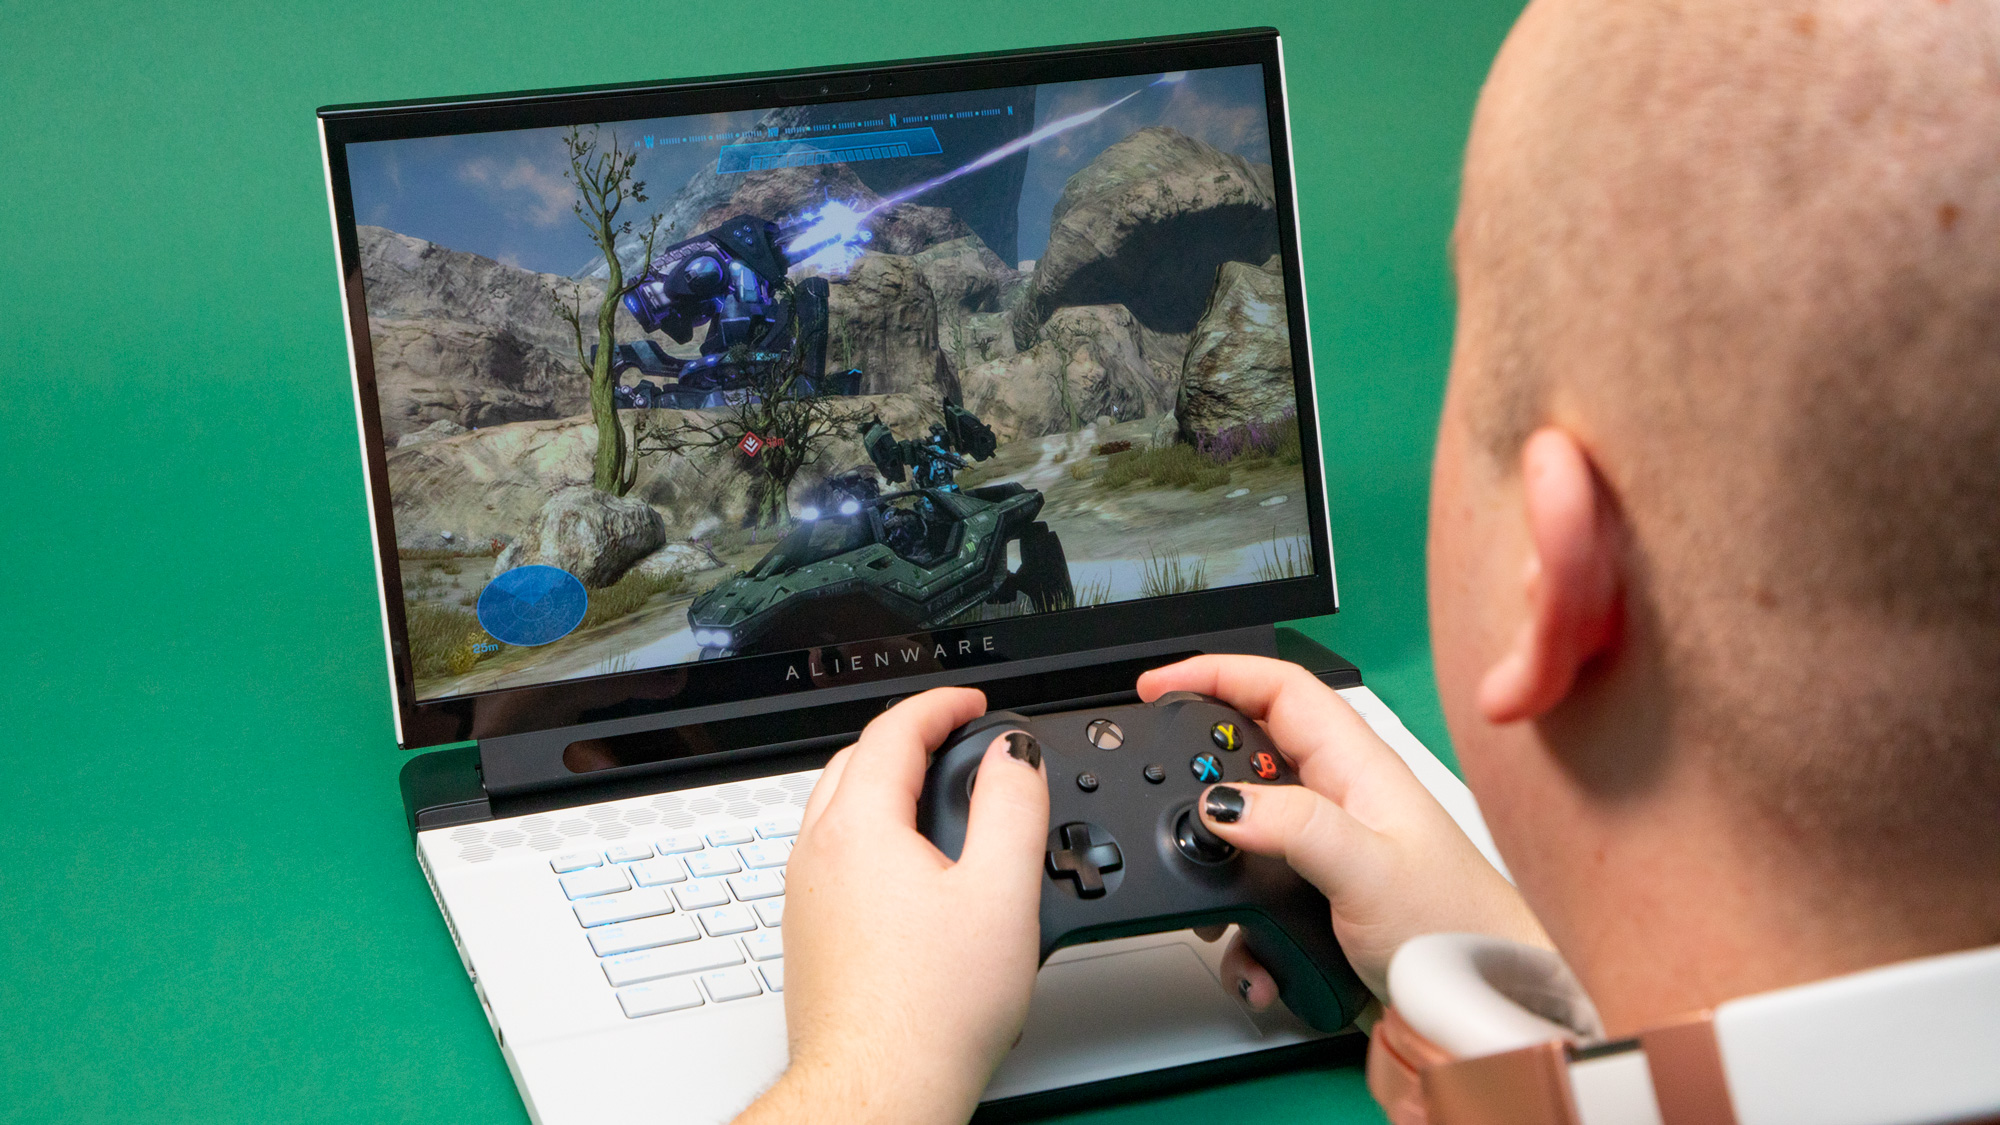 What Games Can You Play On A Alienware Gaming Laptop